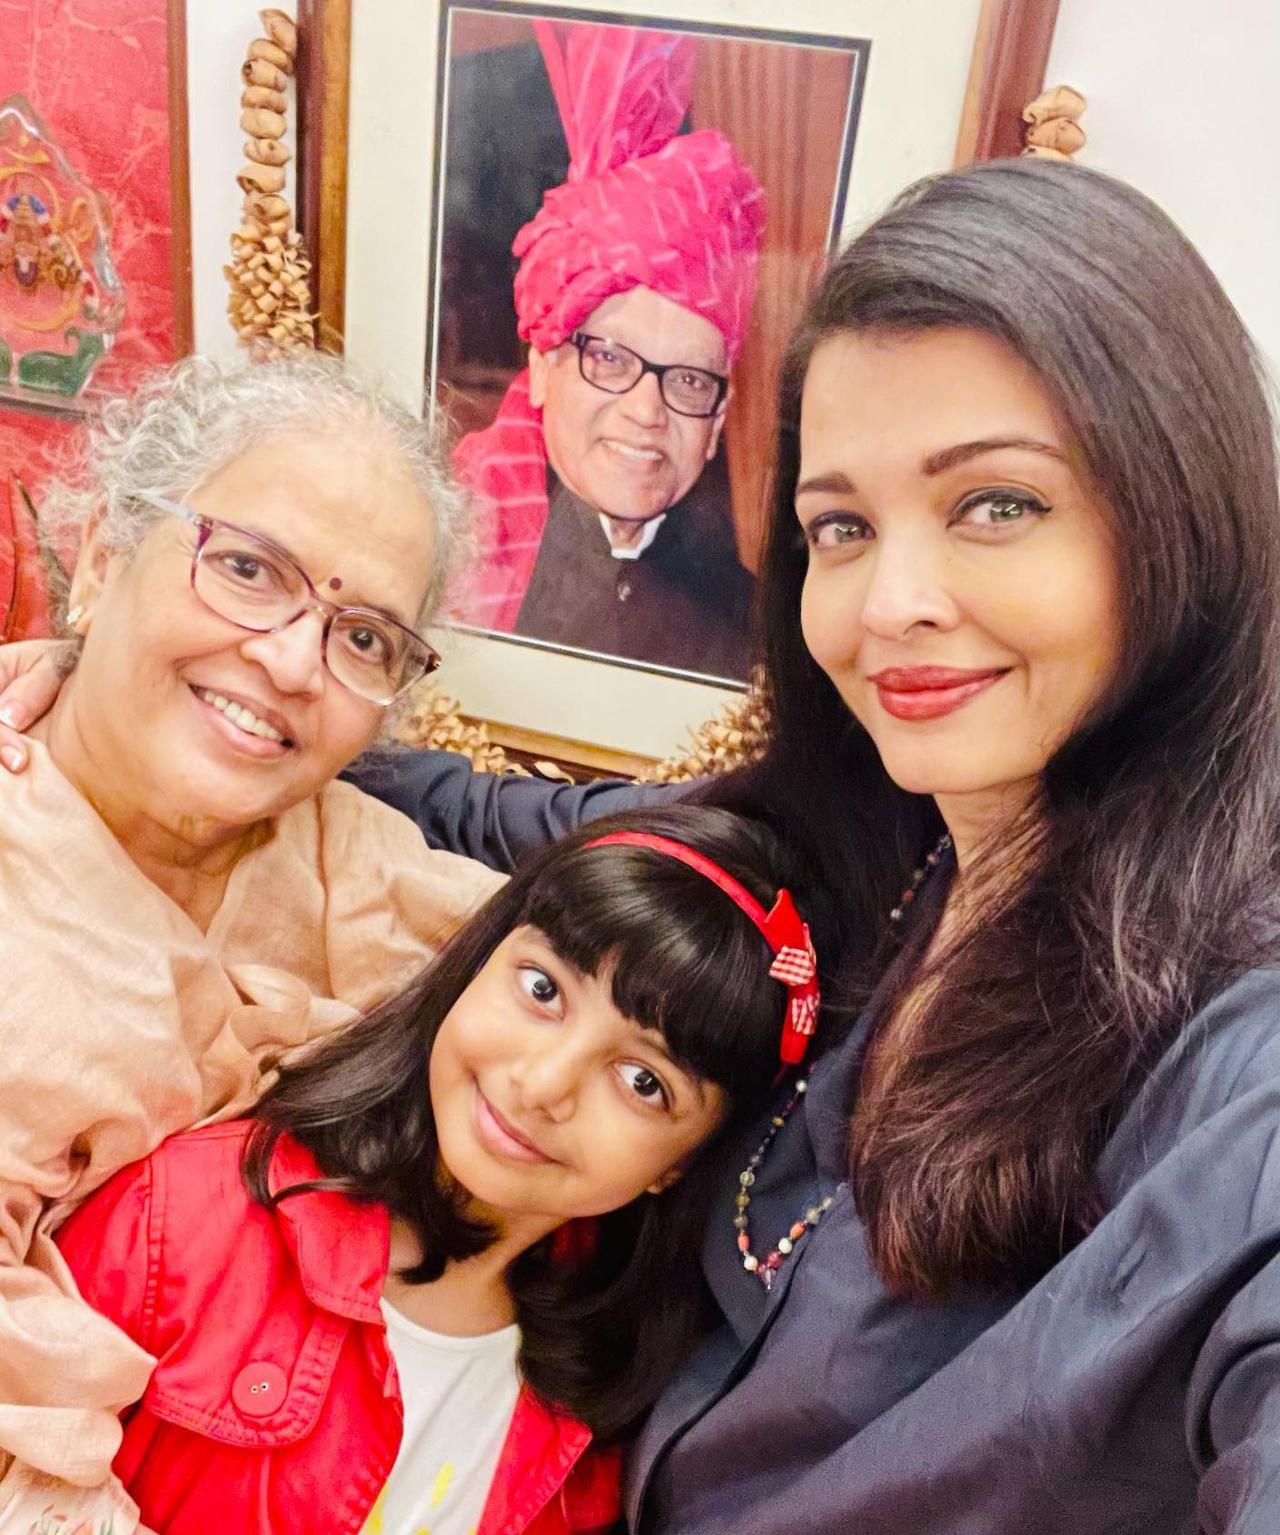 The gorgeous Aishwarya Rai Bachchan has always been very close to her mother Vrinda Rai, who celebrates her birthday today. The actress's Instagram account is flooded with Brinda Rai's pictures that are truly adorable. In this picture, the actress wishes her mother a Happy Anniversary by clicking a selfie with her and her daughter Aaradhya.